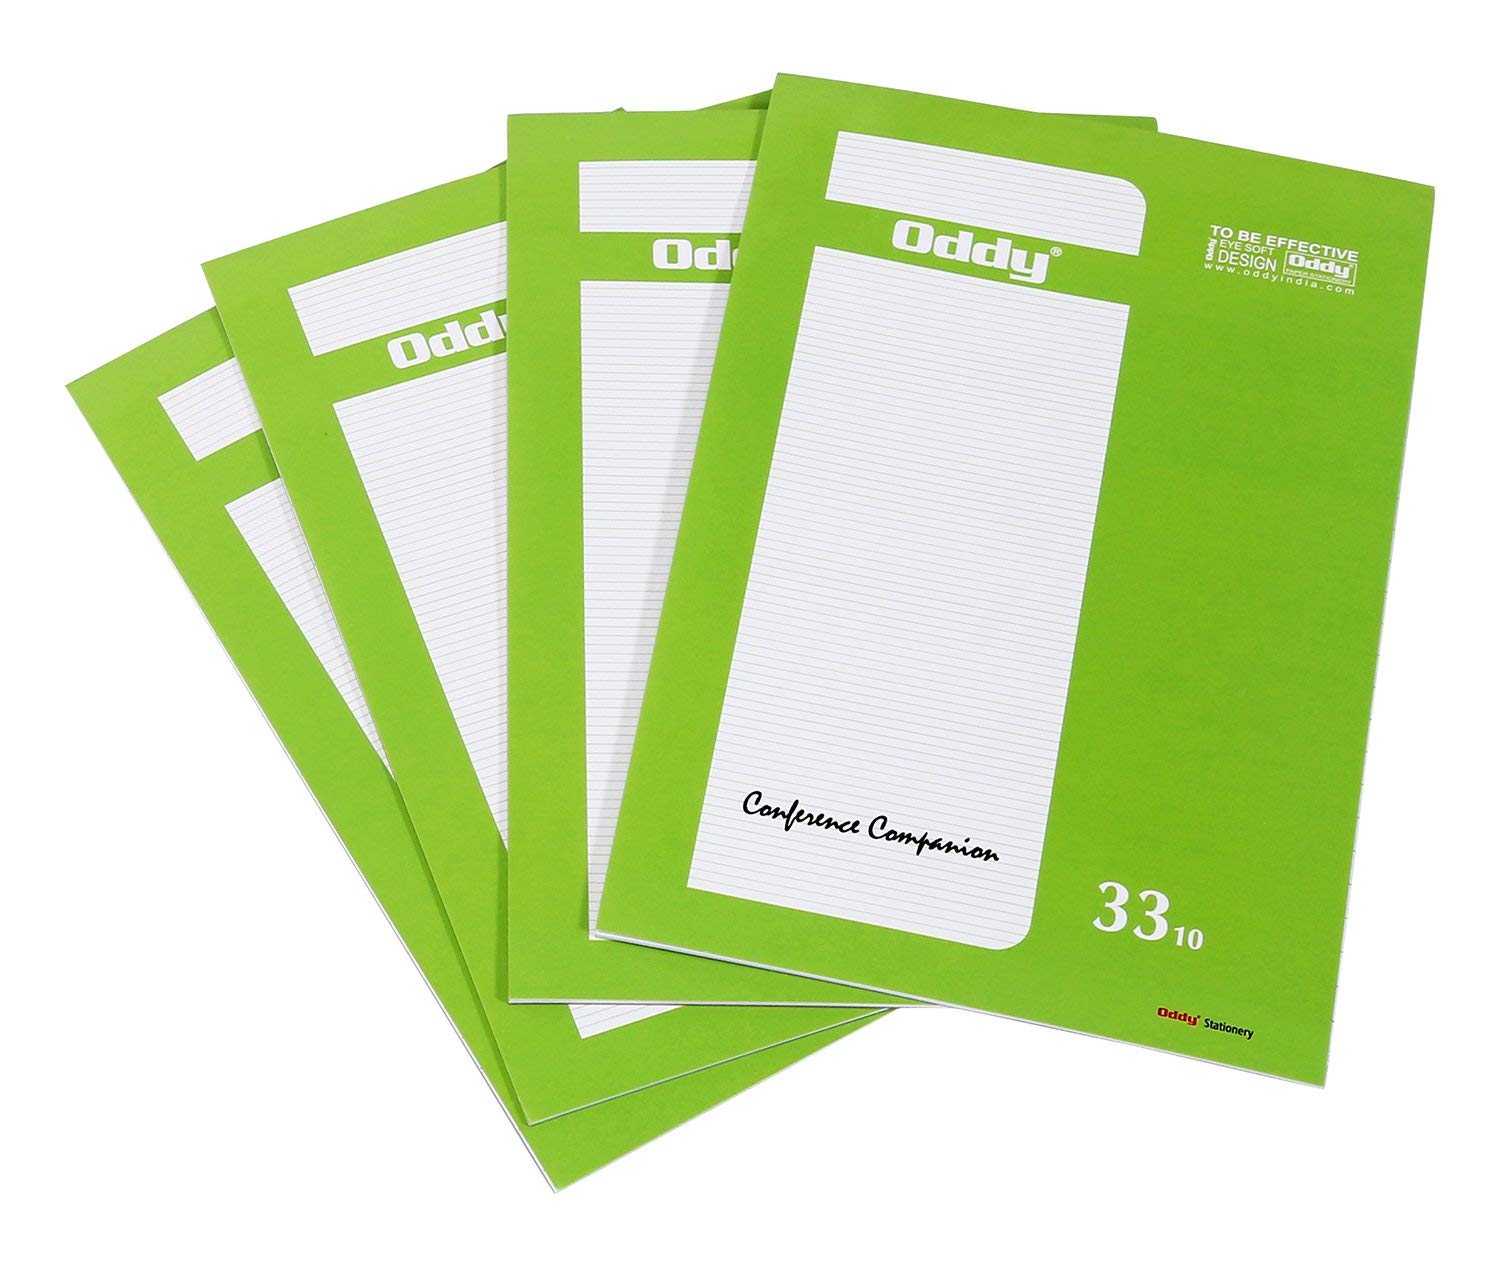 Oddy Conference Pad 1/8, 102gsm Single Side